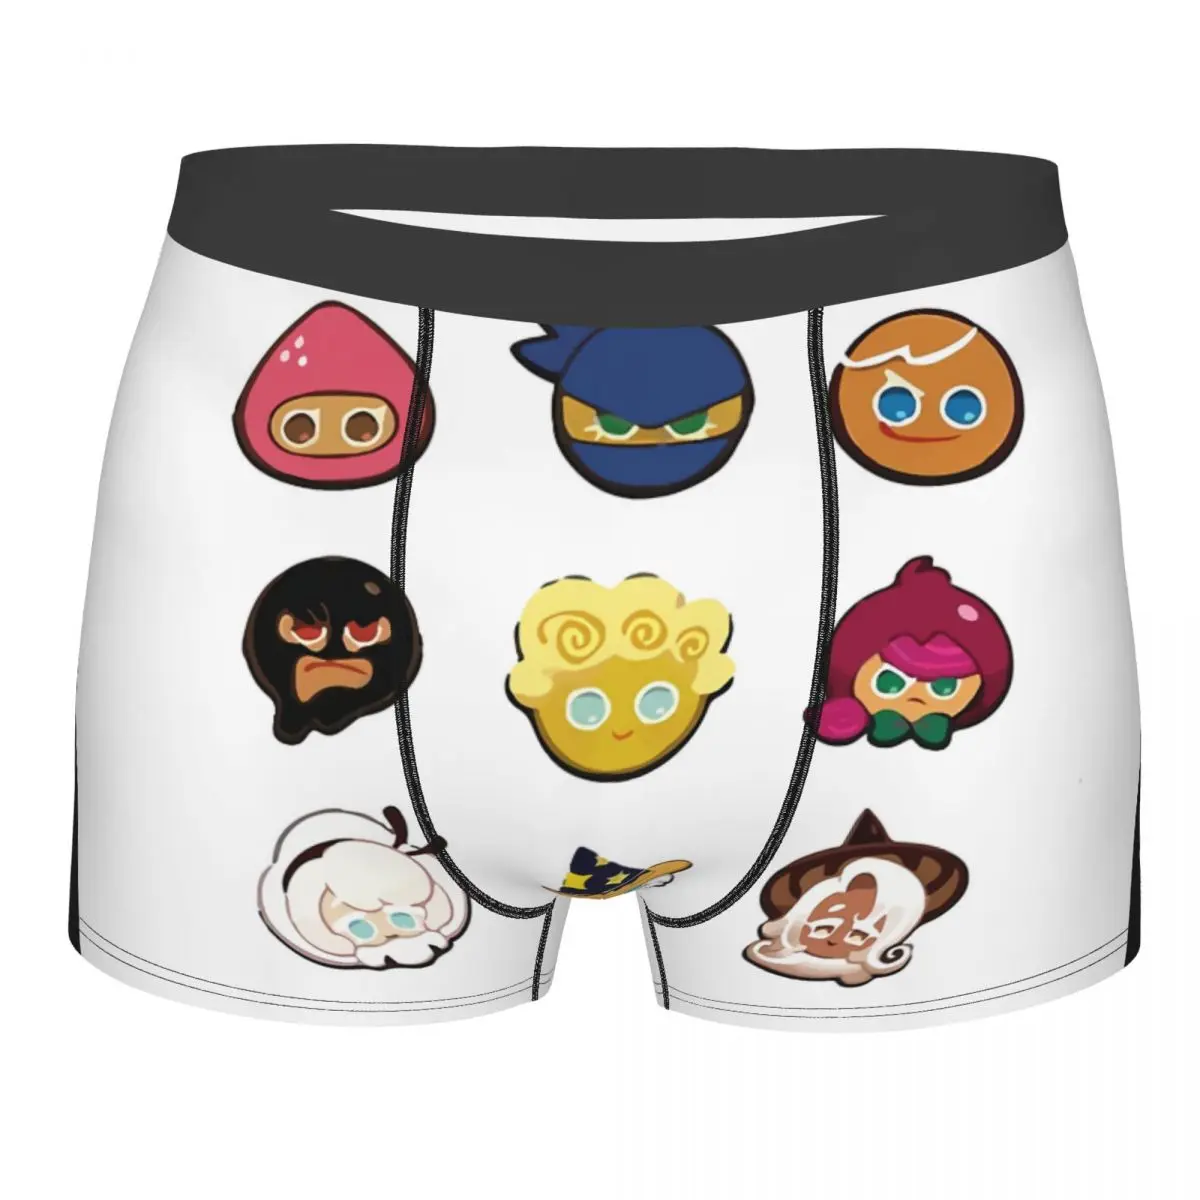 

Sticker Pack Men Boxer Briefs Underpants Cookie Run Game Highly Breathable Top Quality Sexy Shorts Gift Idea